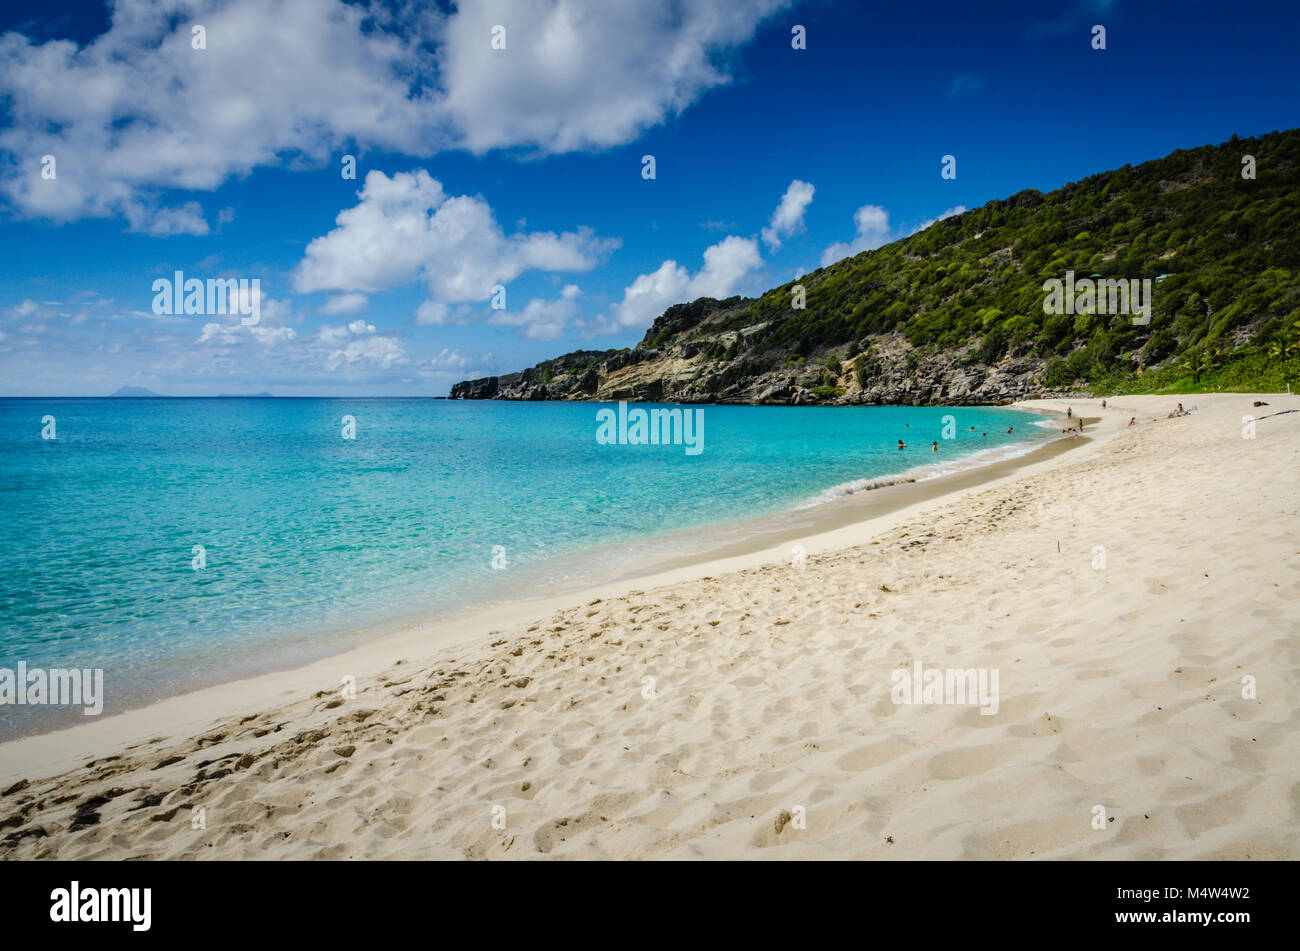 Remote and private Gouverneur Beach on the French Caribbean island of Saint Barthélemy (St Barts.) Stock Photo